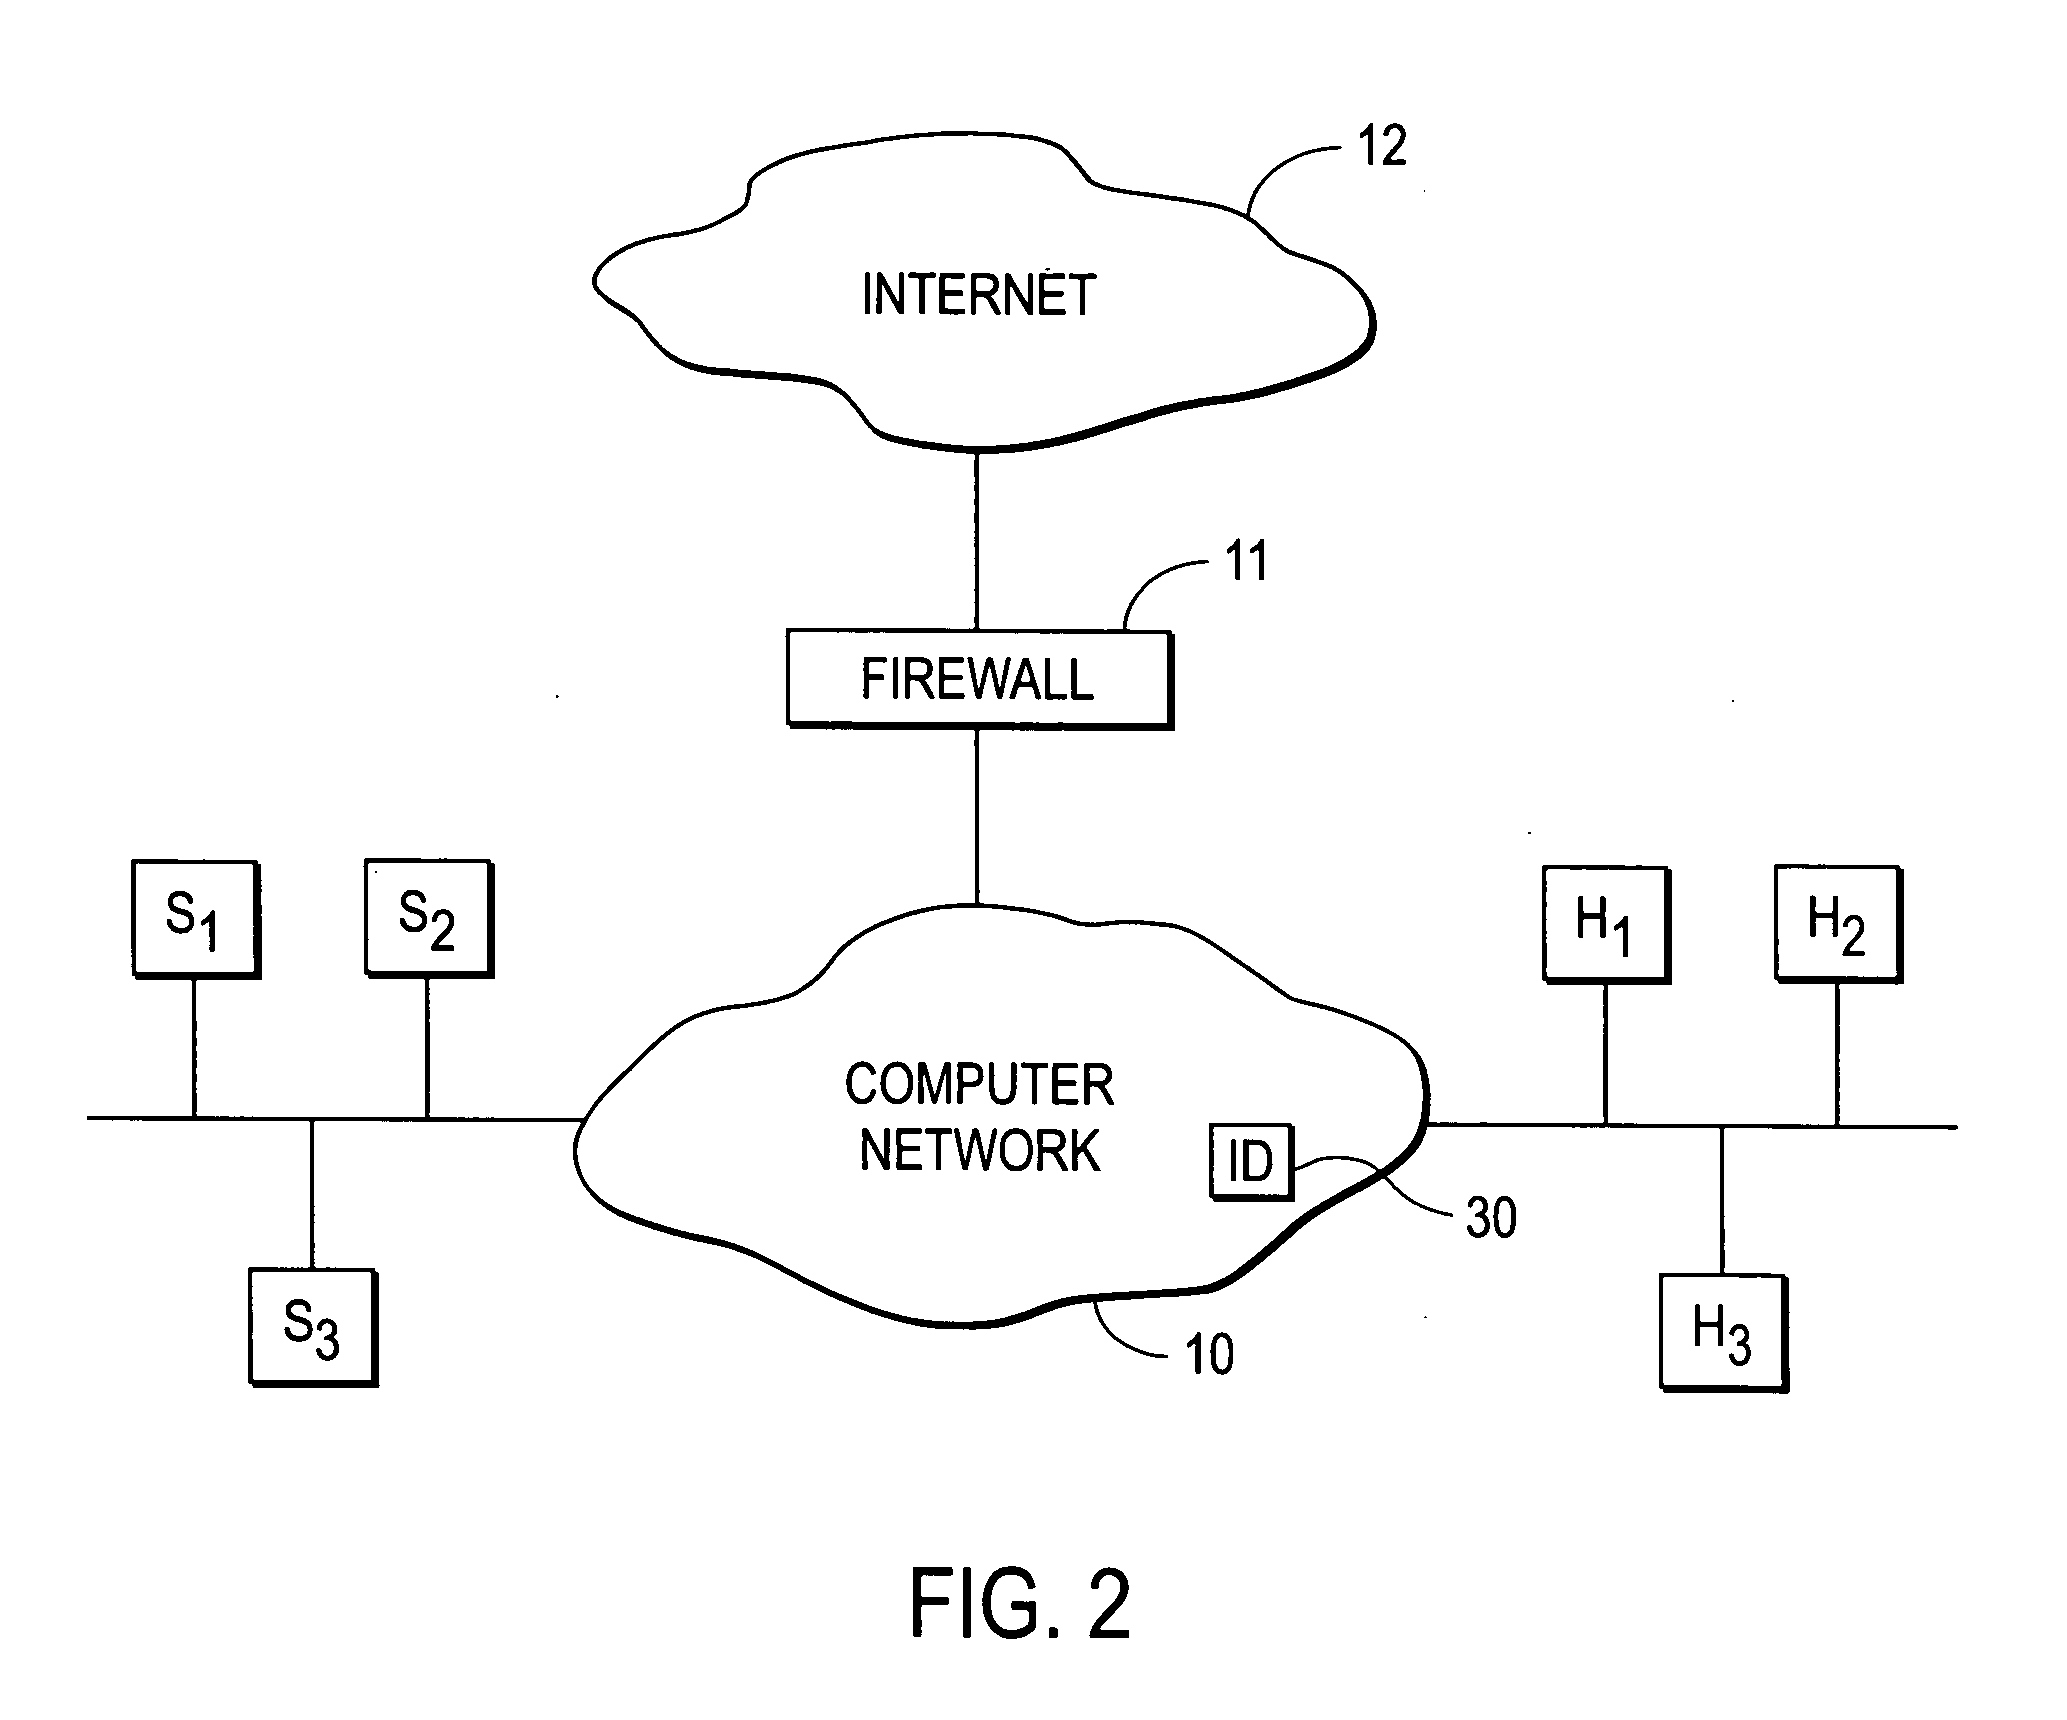 Network intrusion detection system having application inspection and anomaly detection characteristics